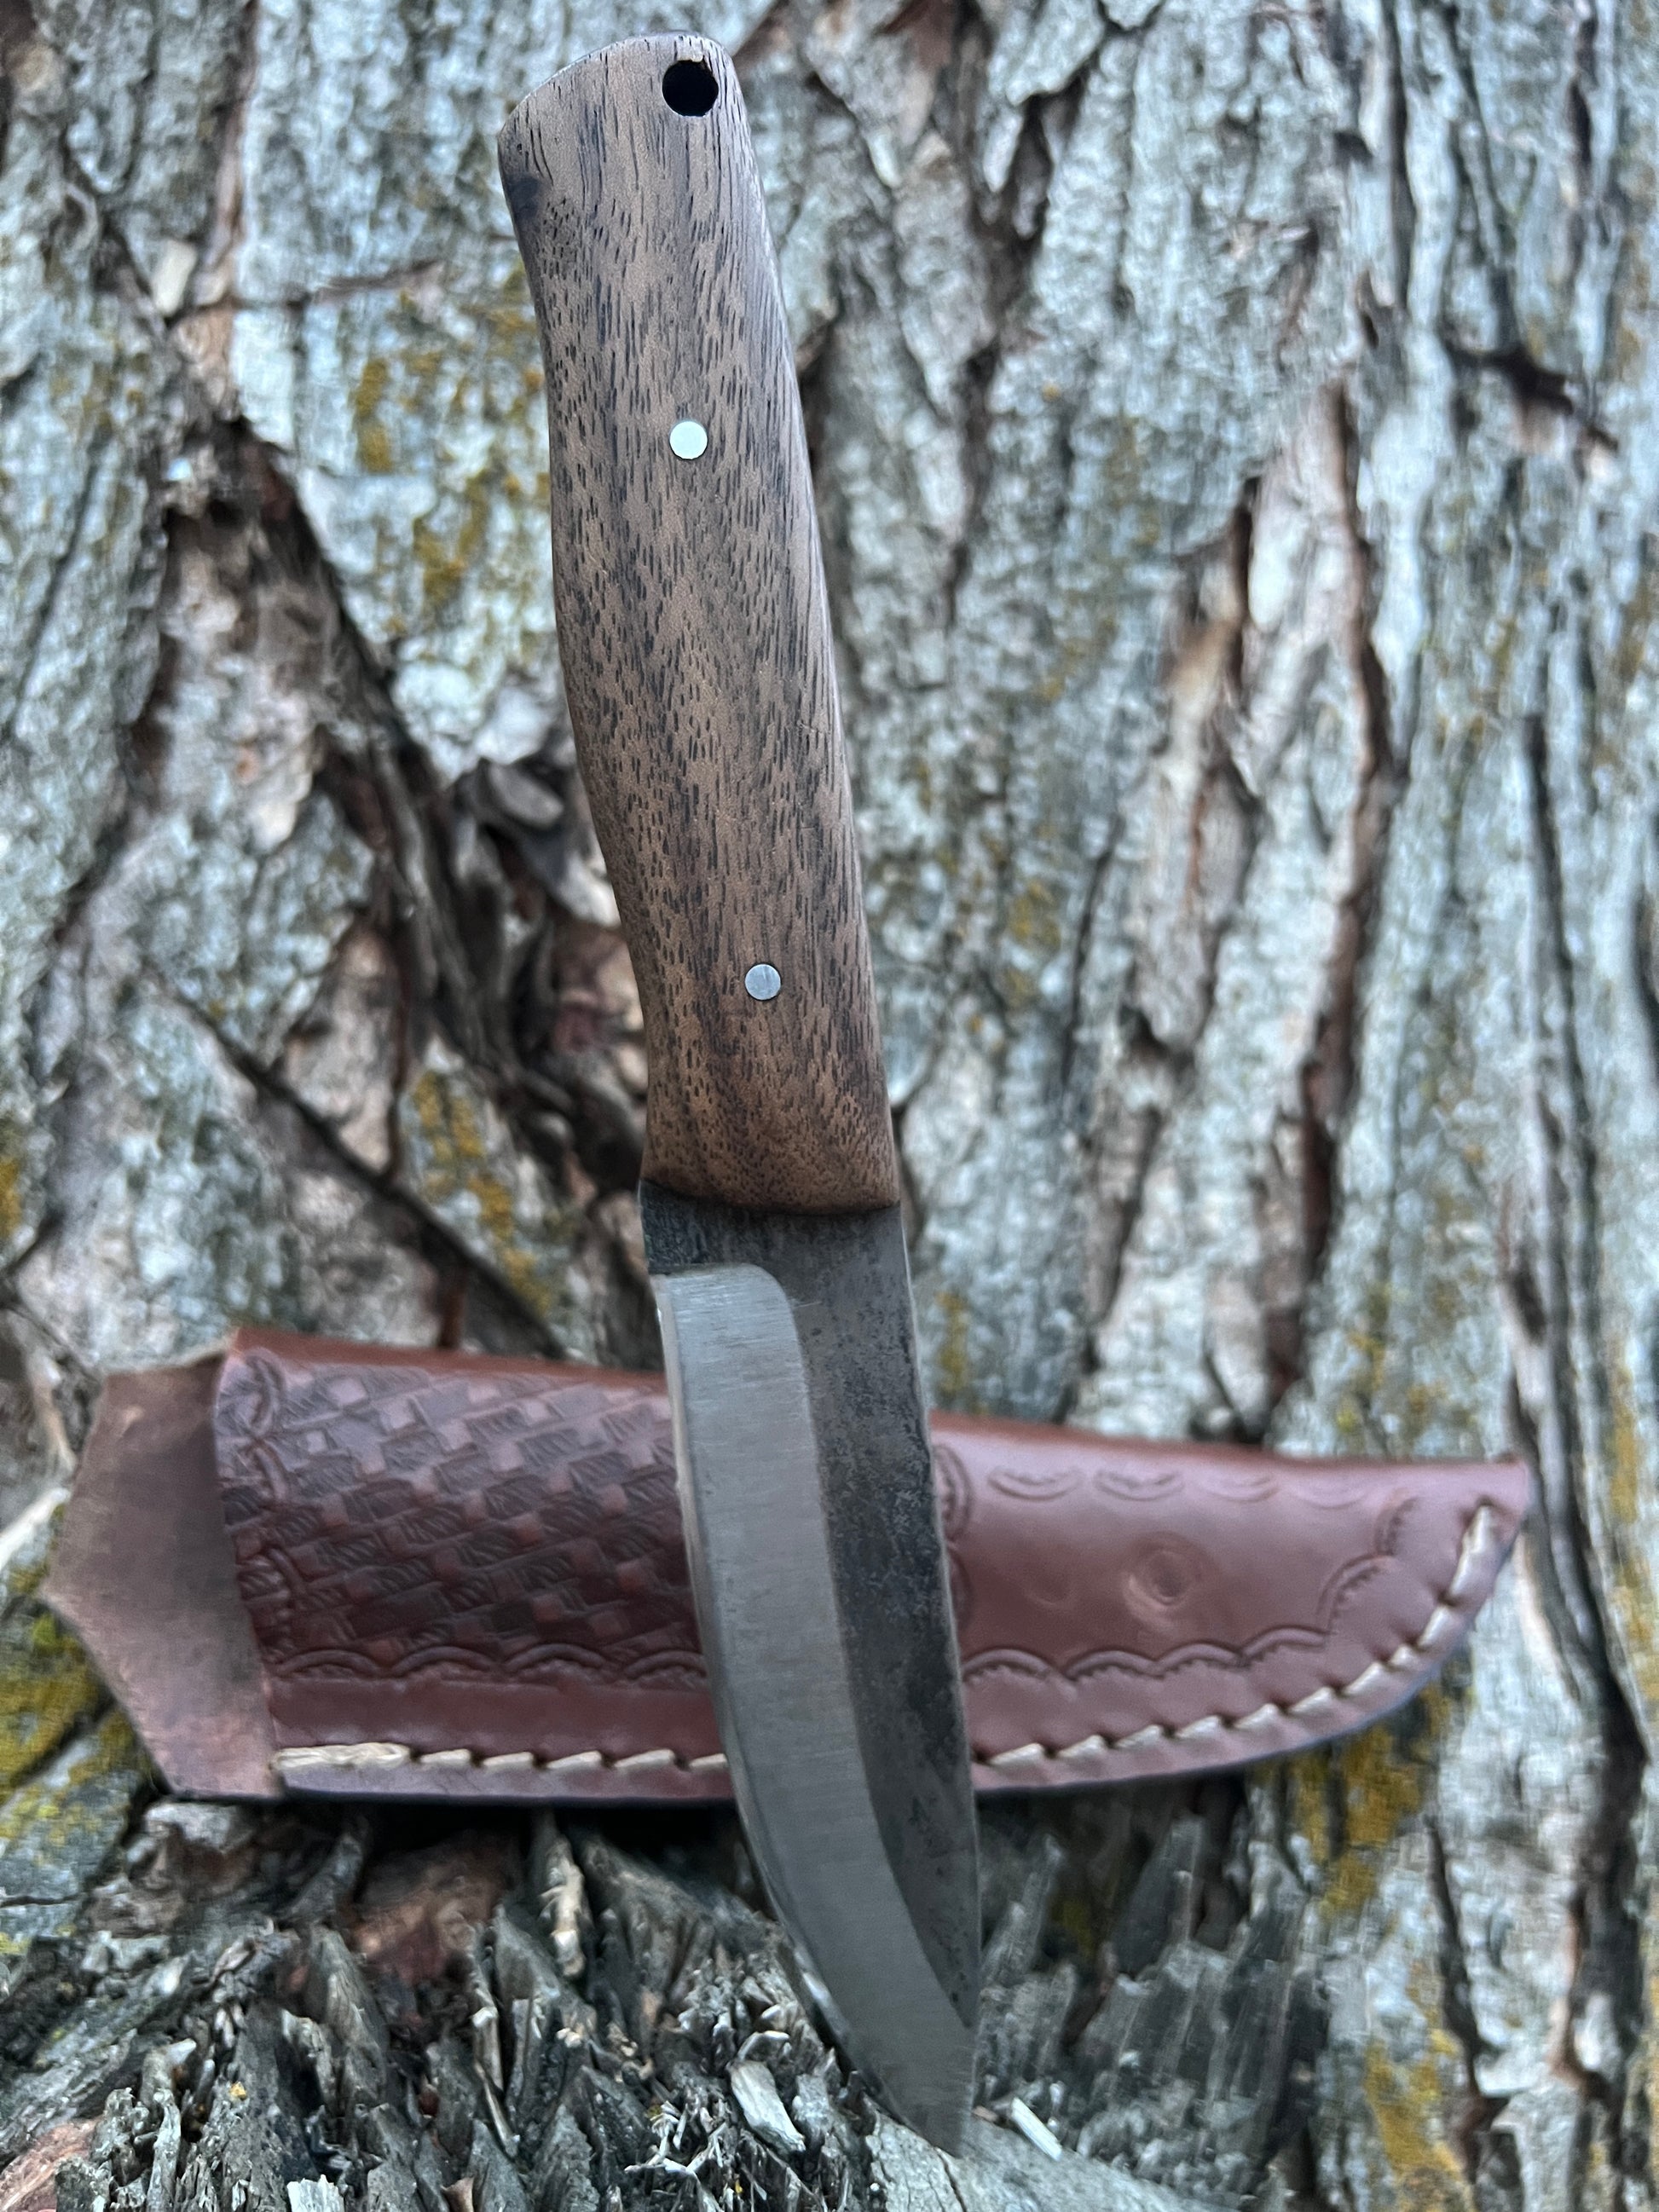 Bushcraft knife with leather sheath in outdoors